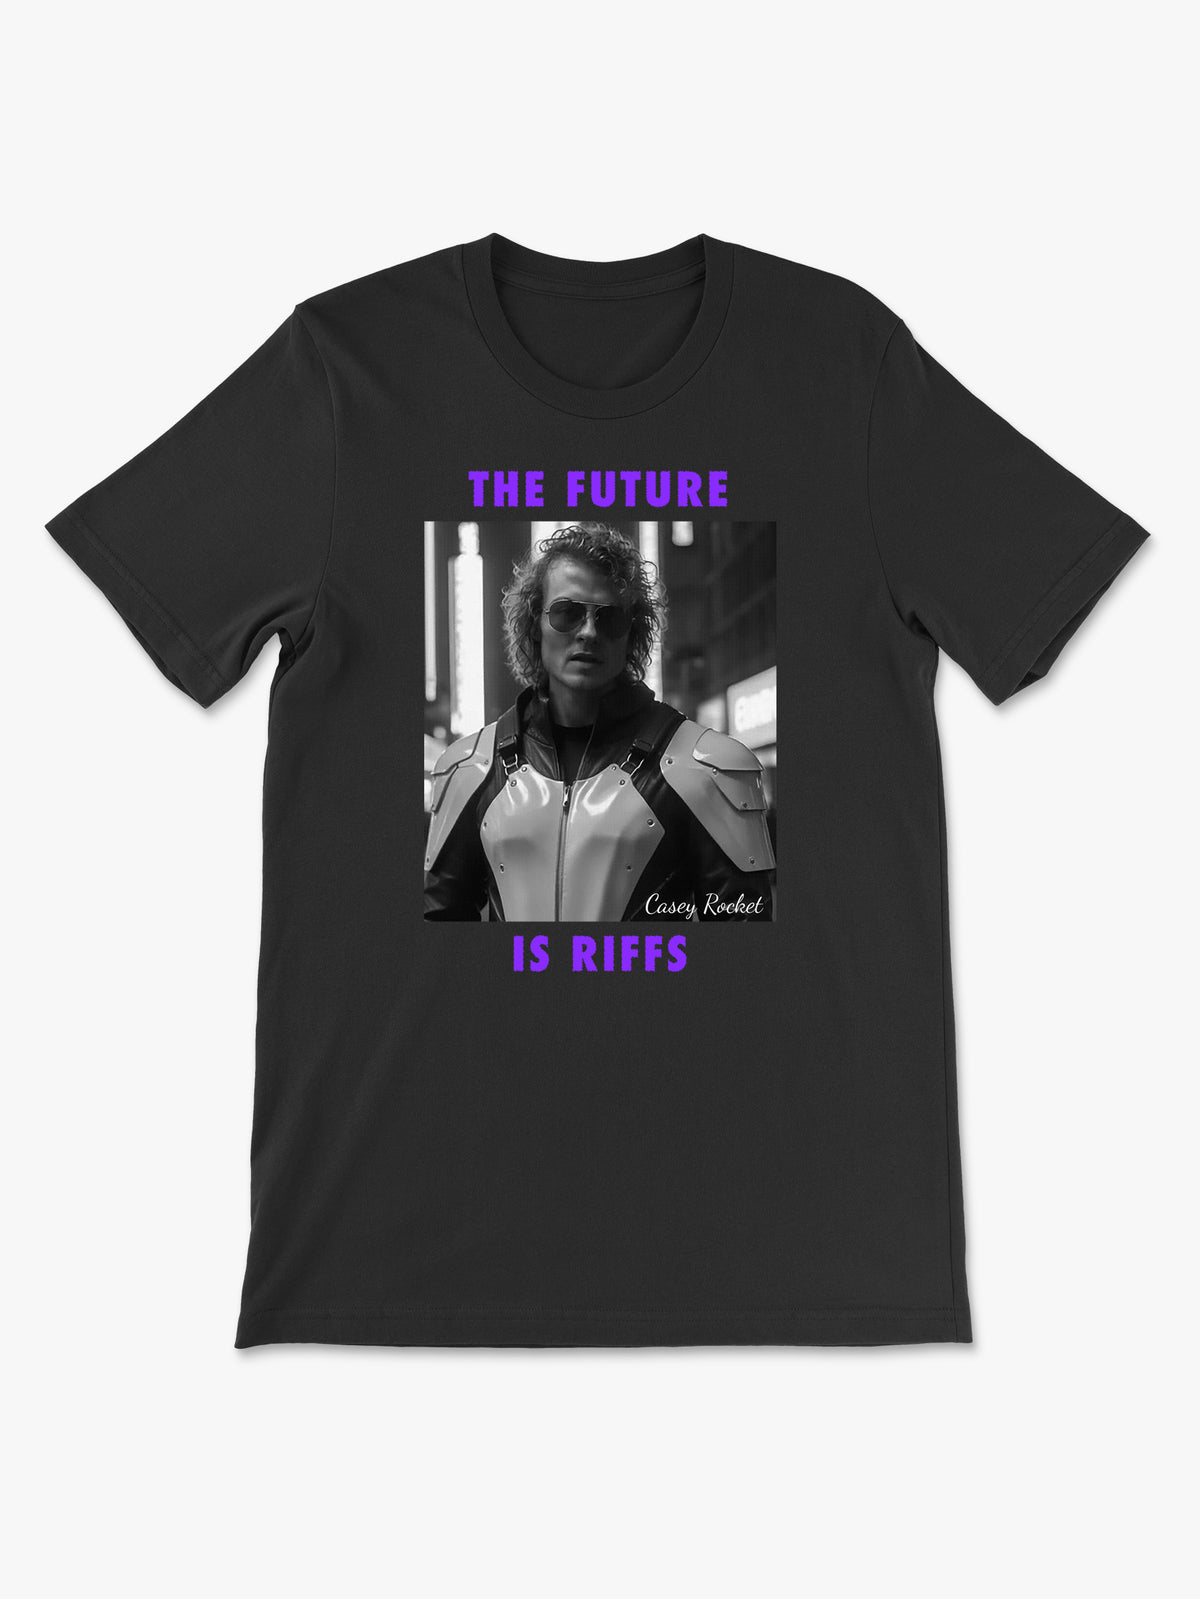 The Future is Riffs by Casey Rocket